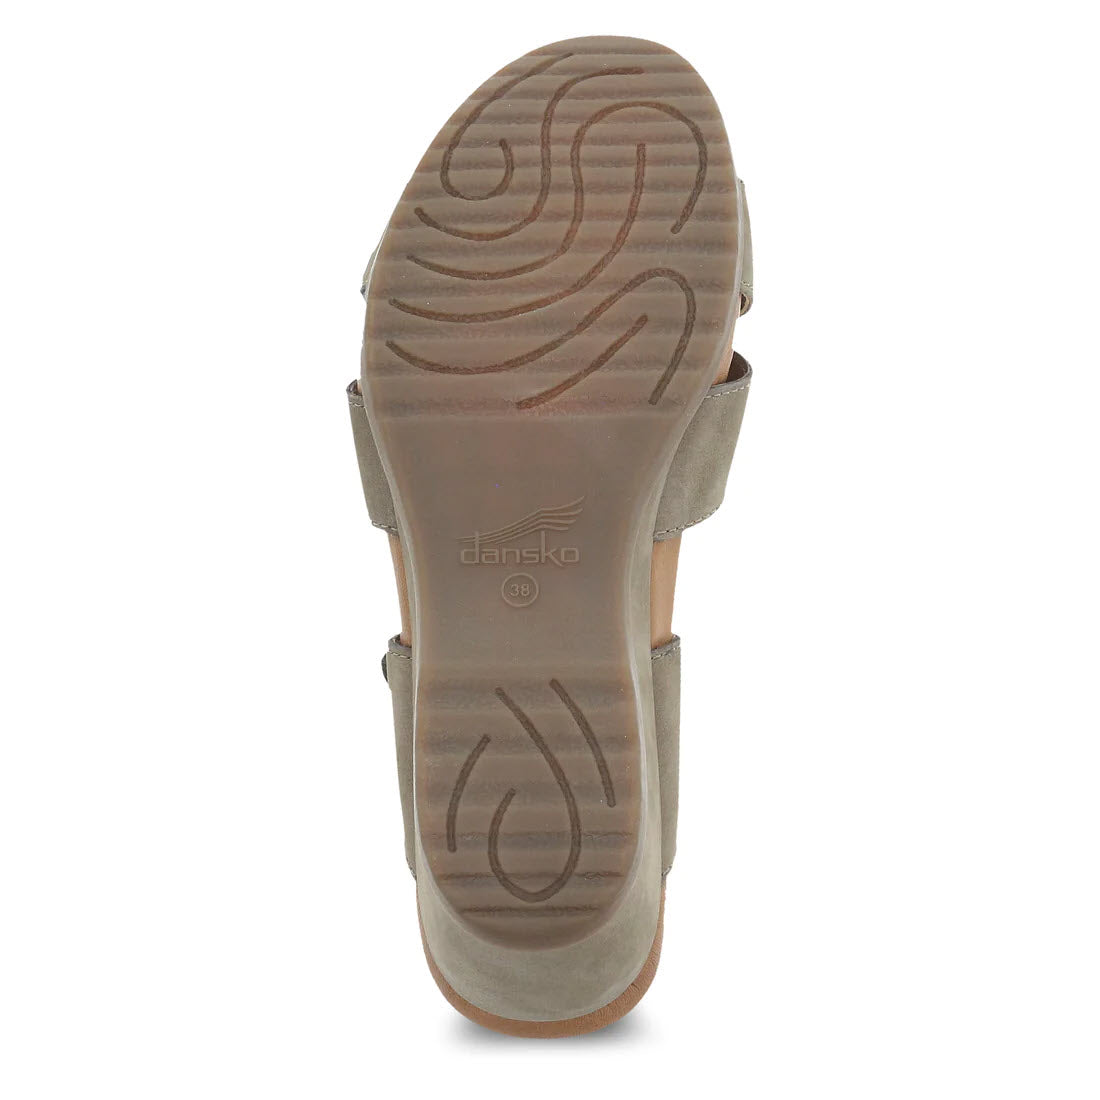 Bottom view of a beige Dansko sandal showing the leather wrapped contoured EVA footbed and brand logo.